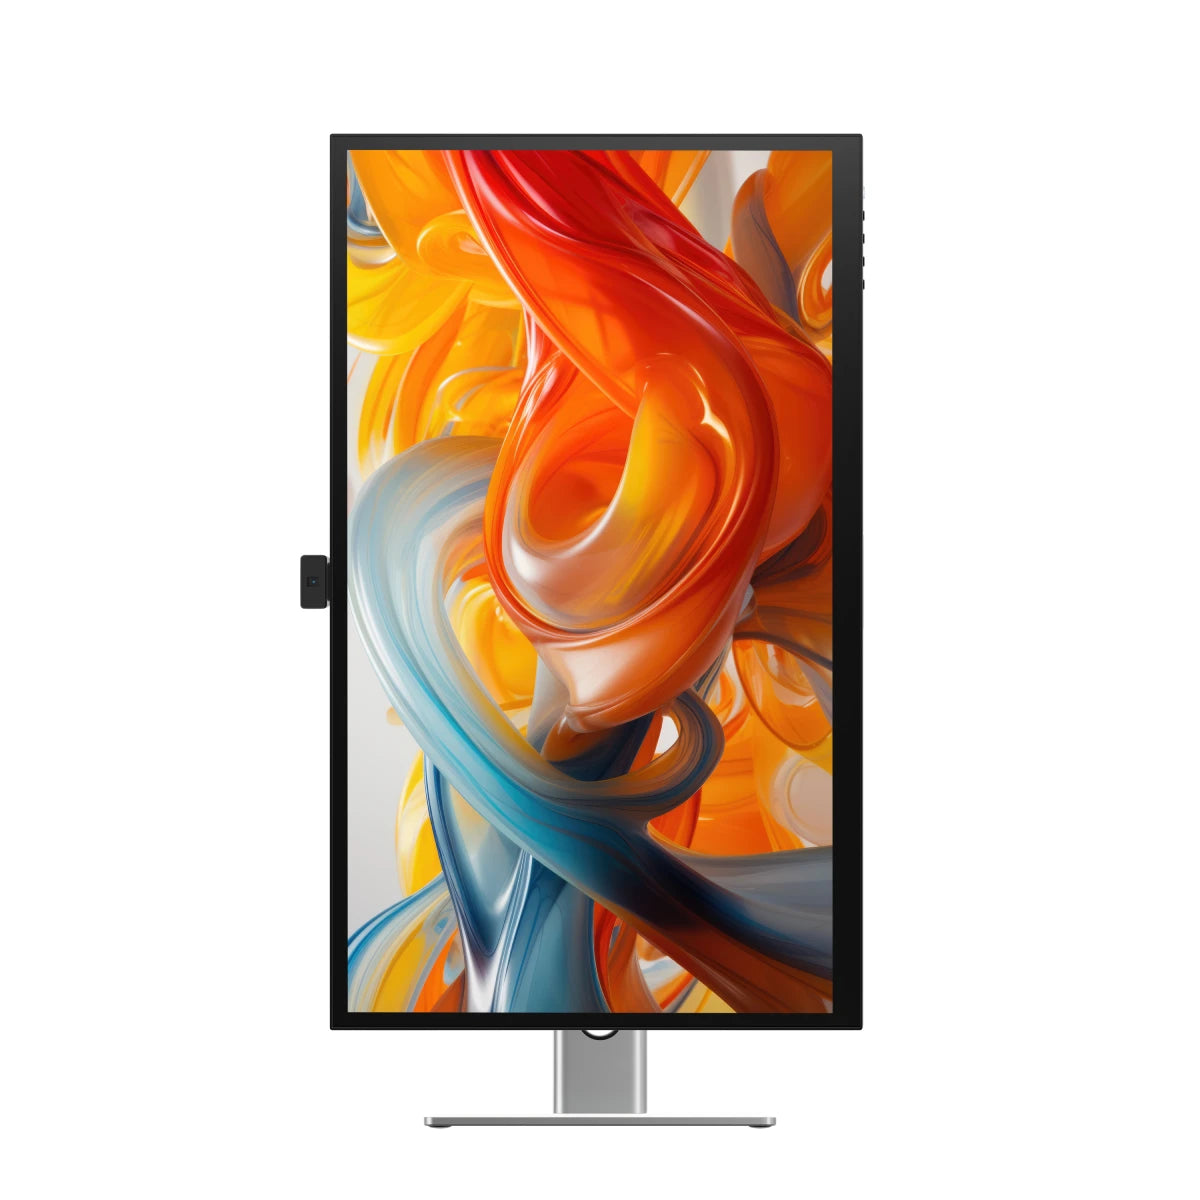 clarity-pro-touch-27-uhd-4k-monitor-with-65w-pd-webcam-and-touchscreen-thunderbolt-4-blaze-docking-station_5